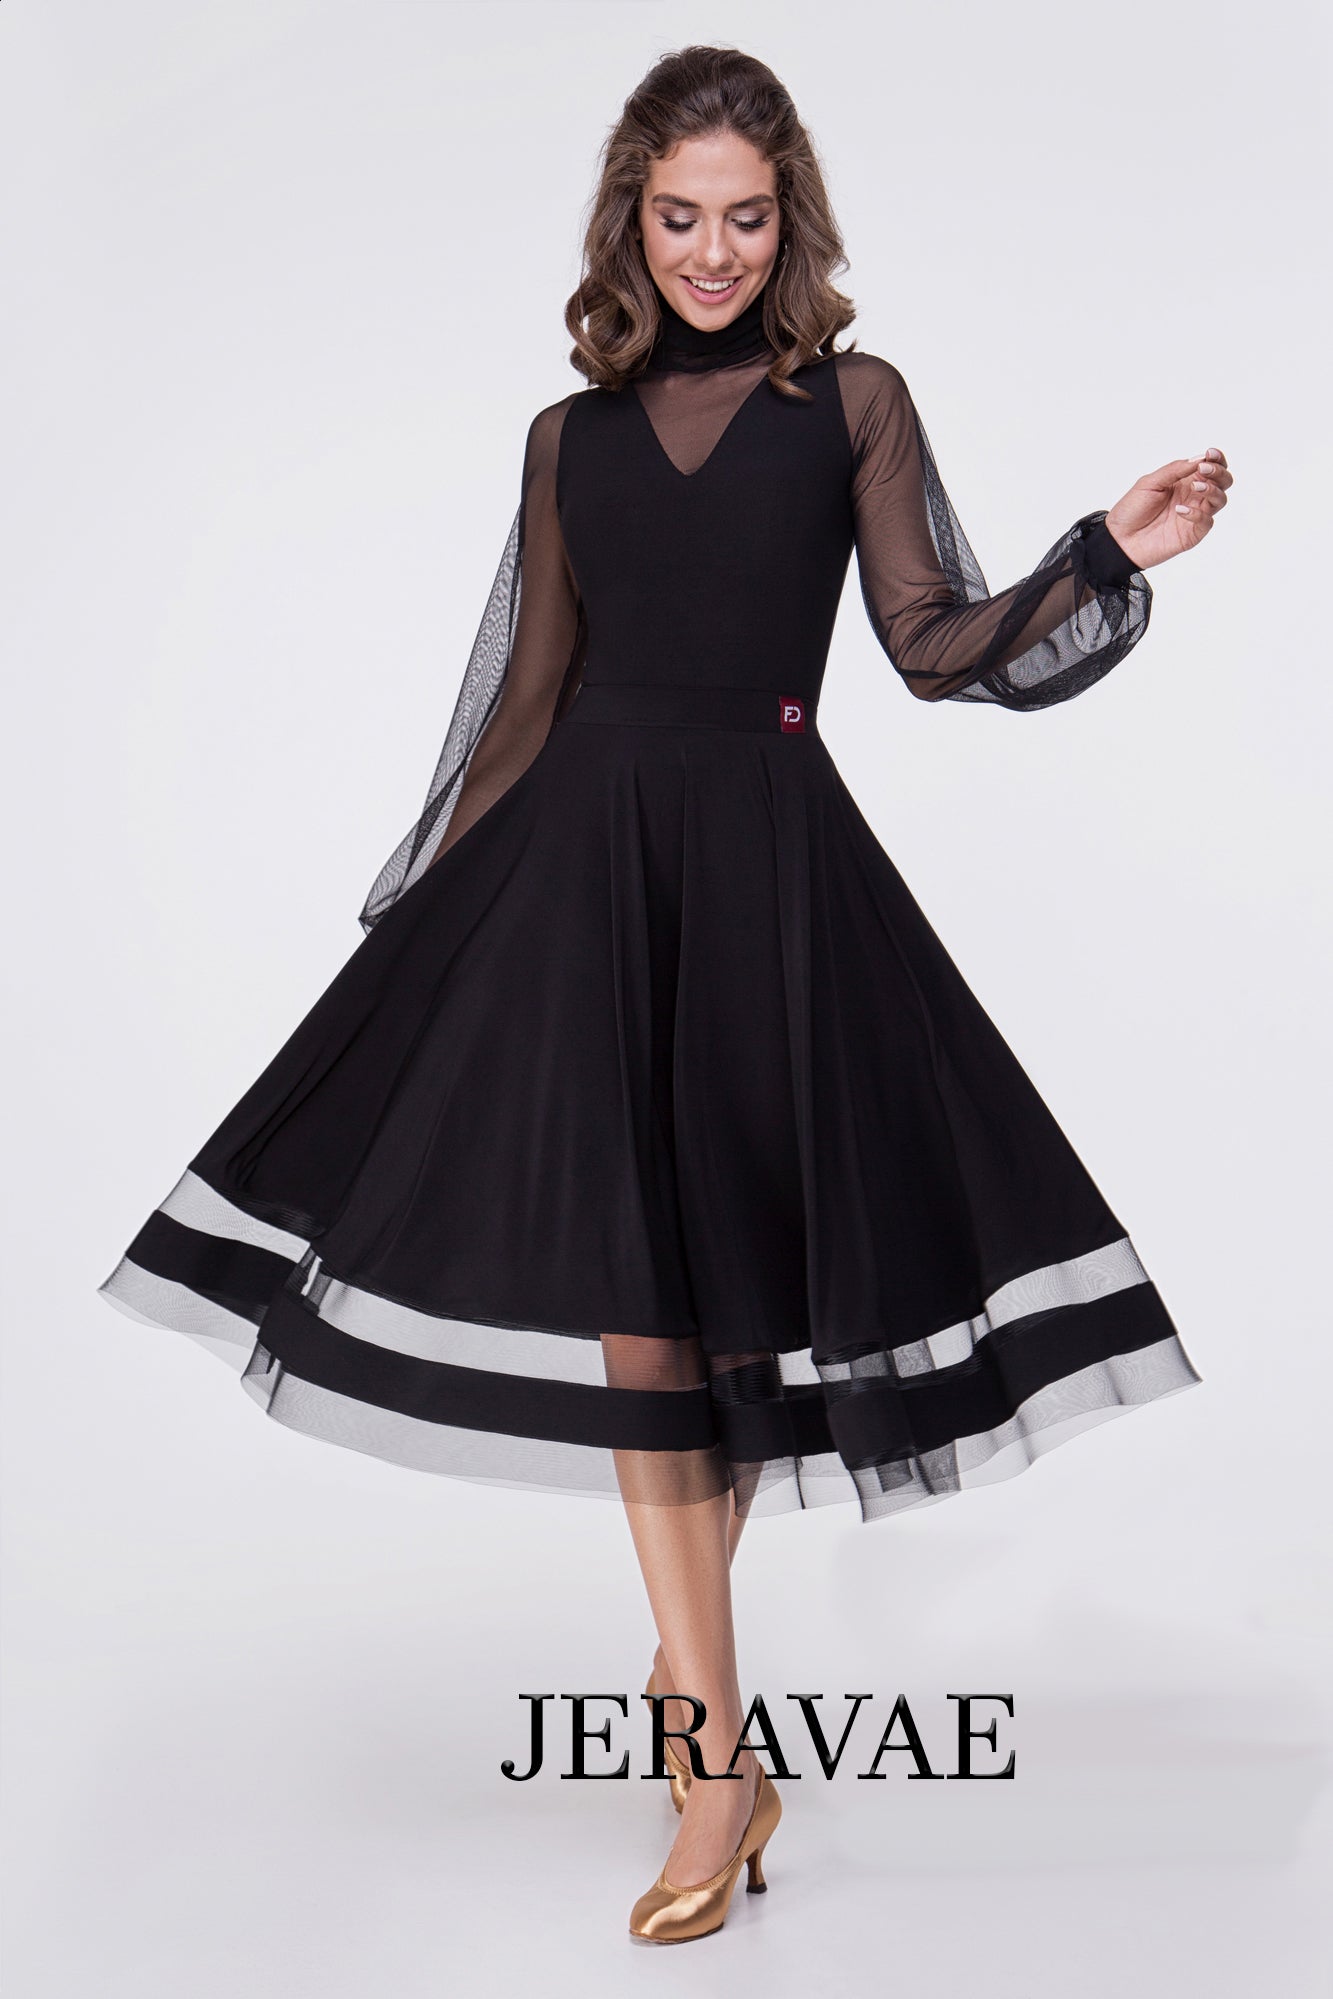 Tea Length Ballroom Or Standard Practice Skirt with Exposed Horsehair Hem and Striped Cut Out Detail Pra551